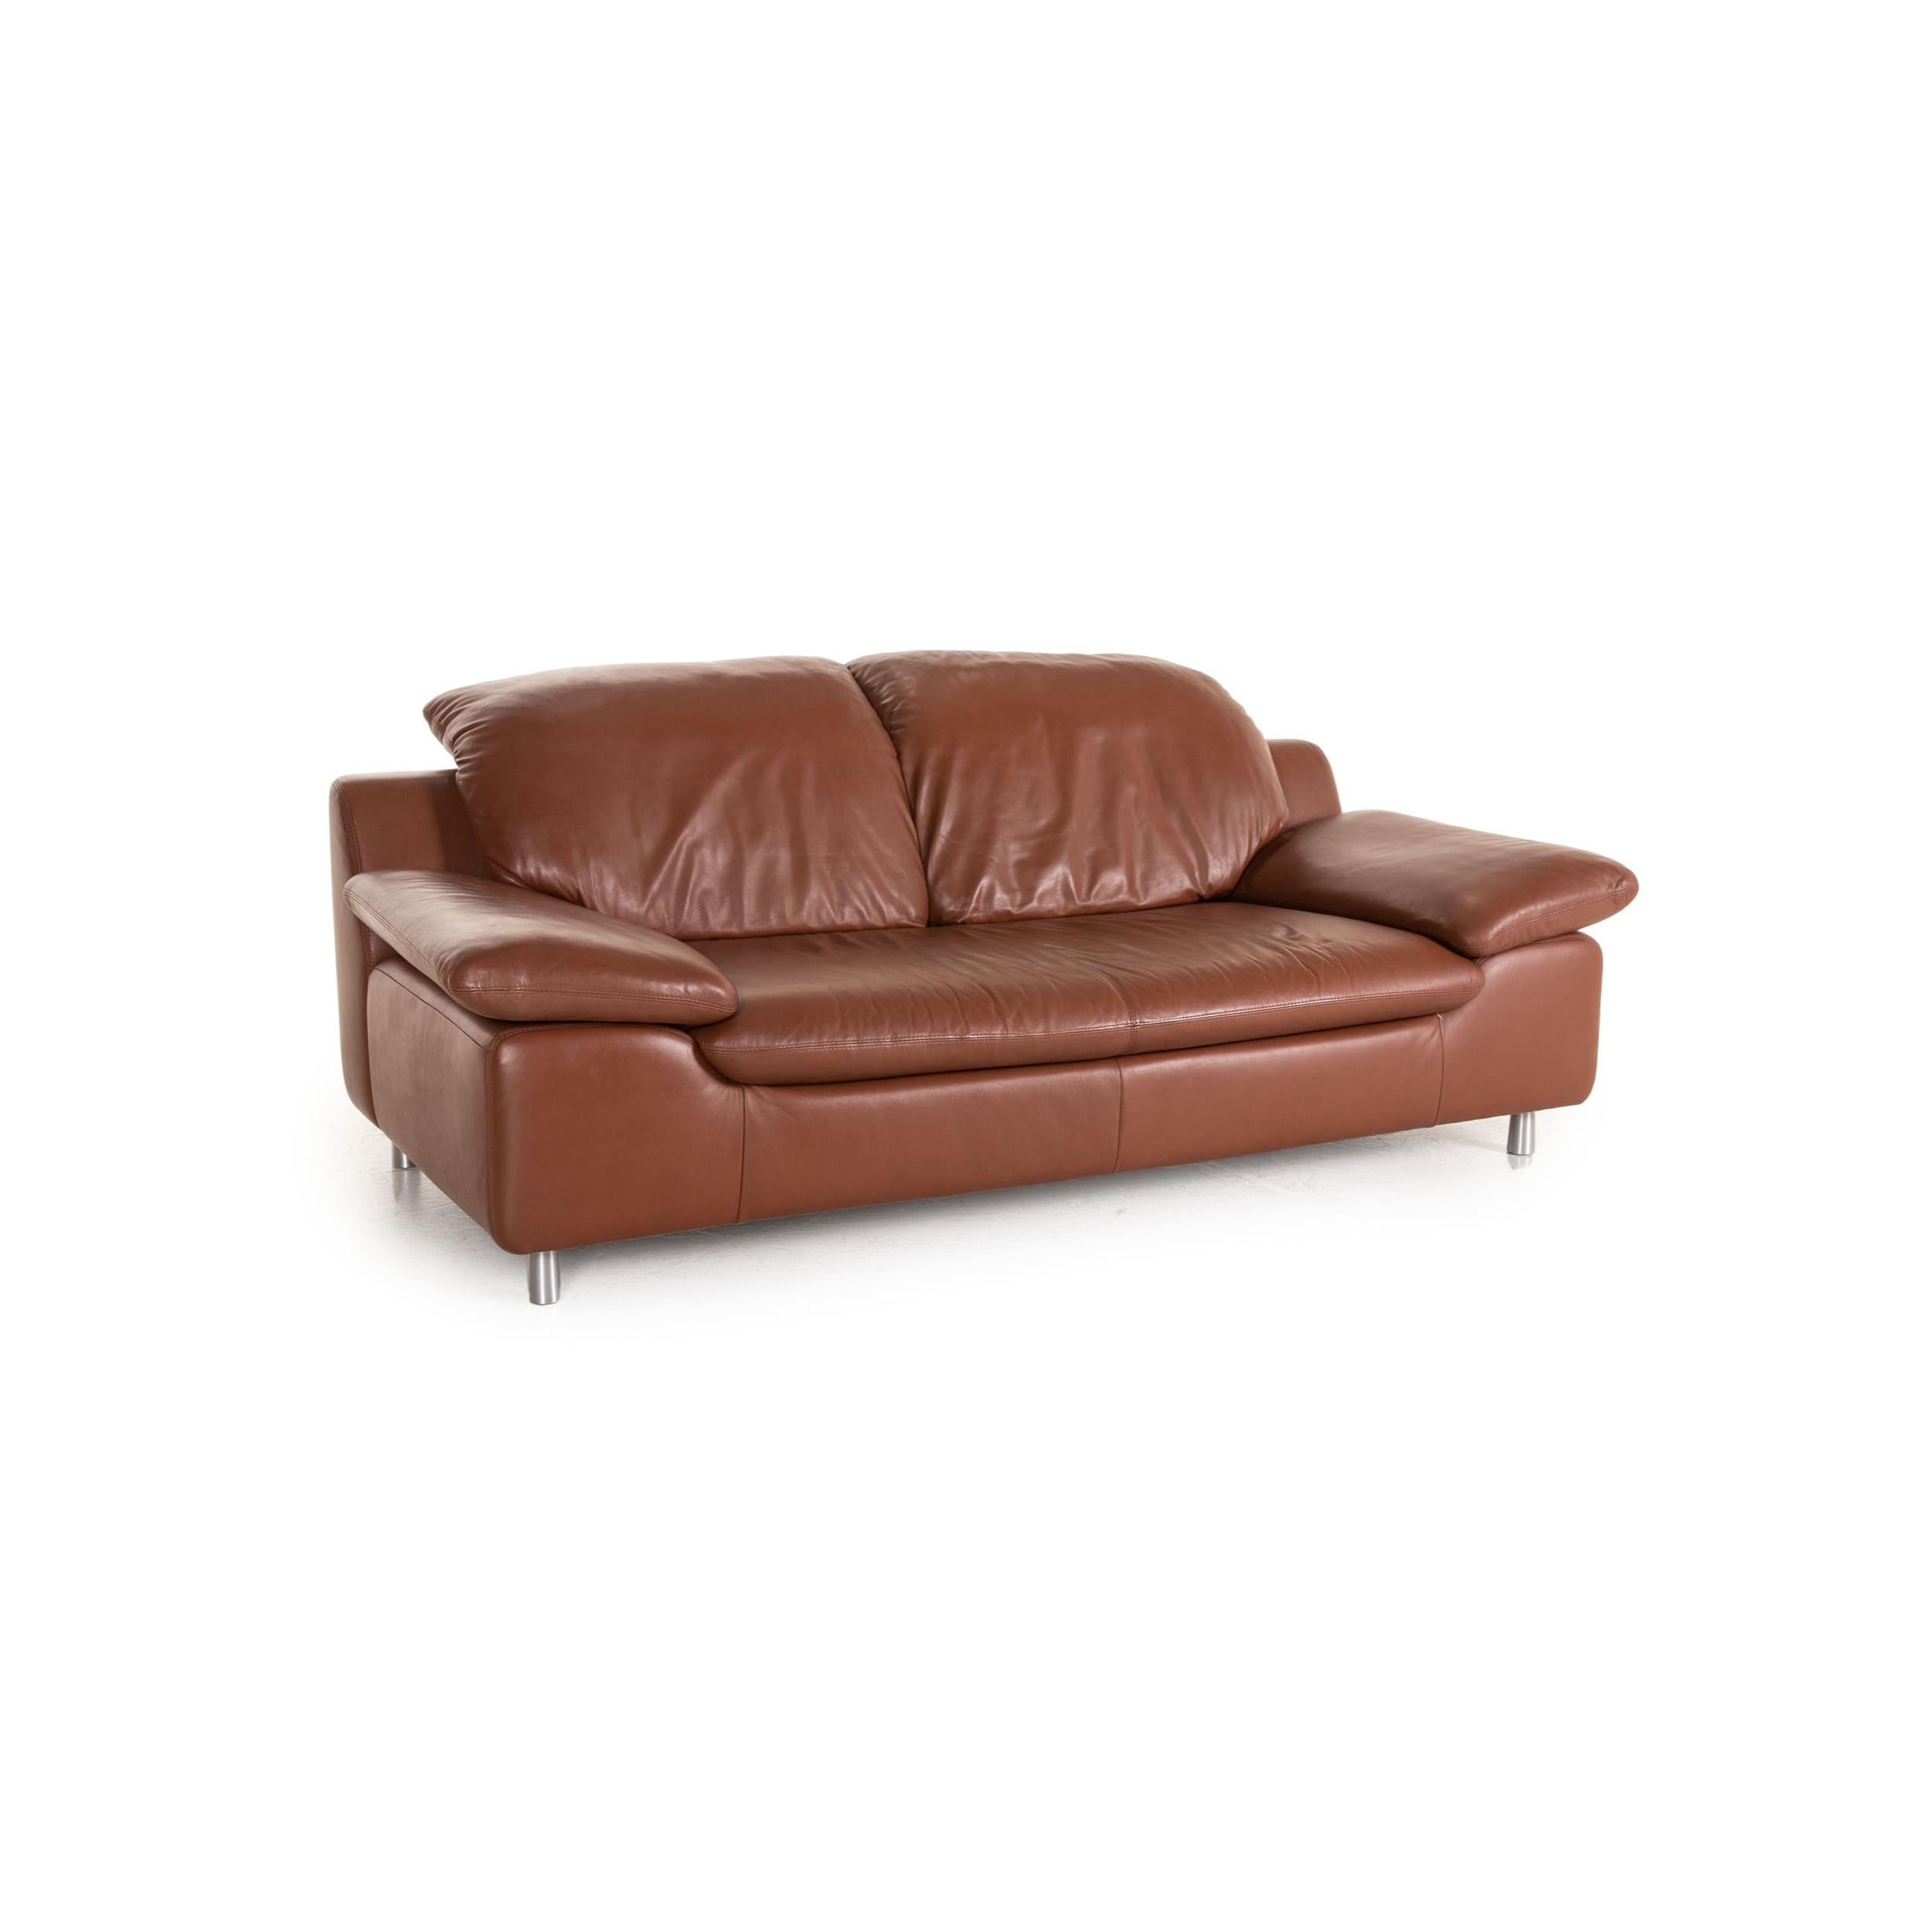 Contemporary Ewald Schillig Leather Sofa Brown Two-Seater Couch For Sale